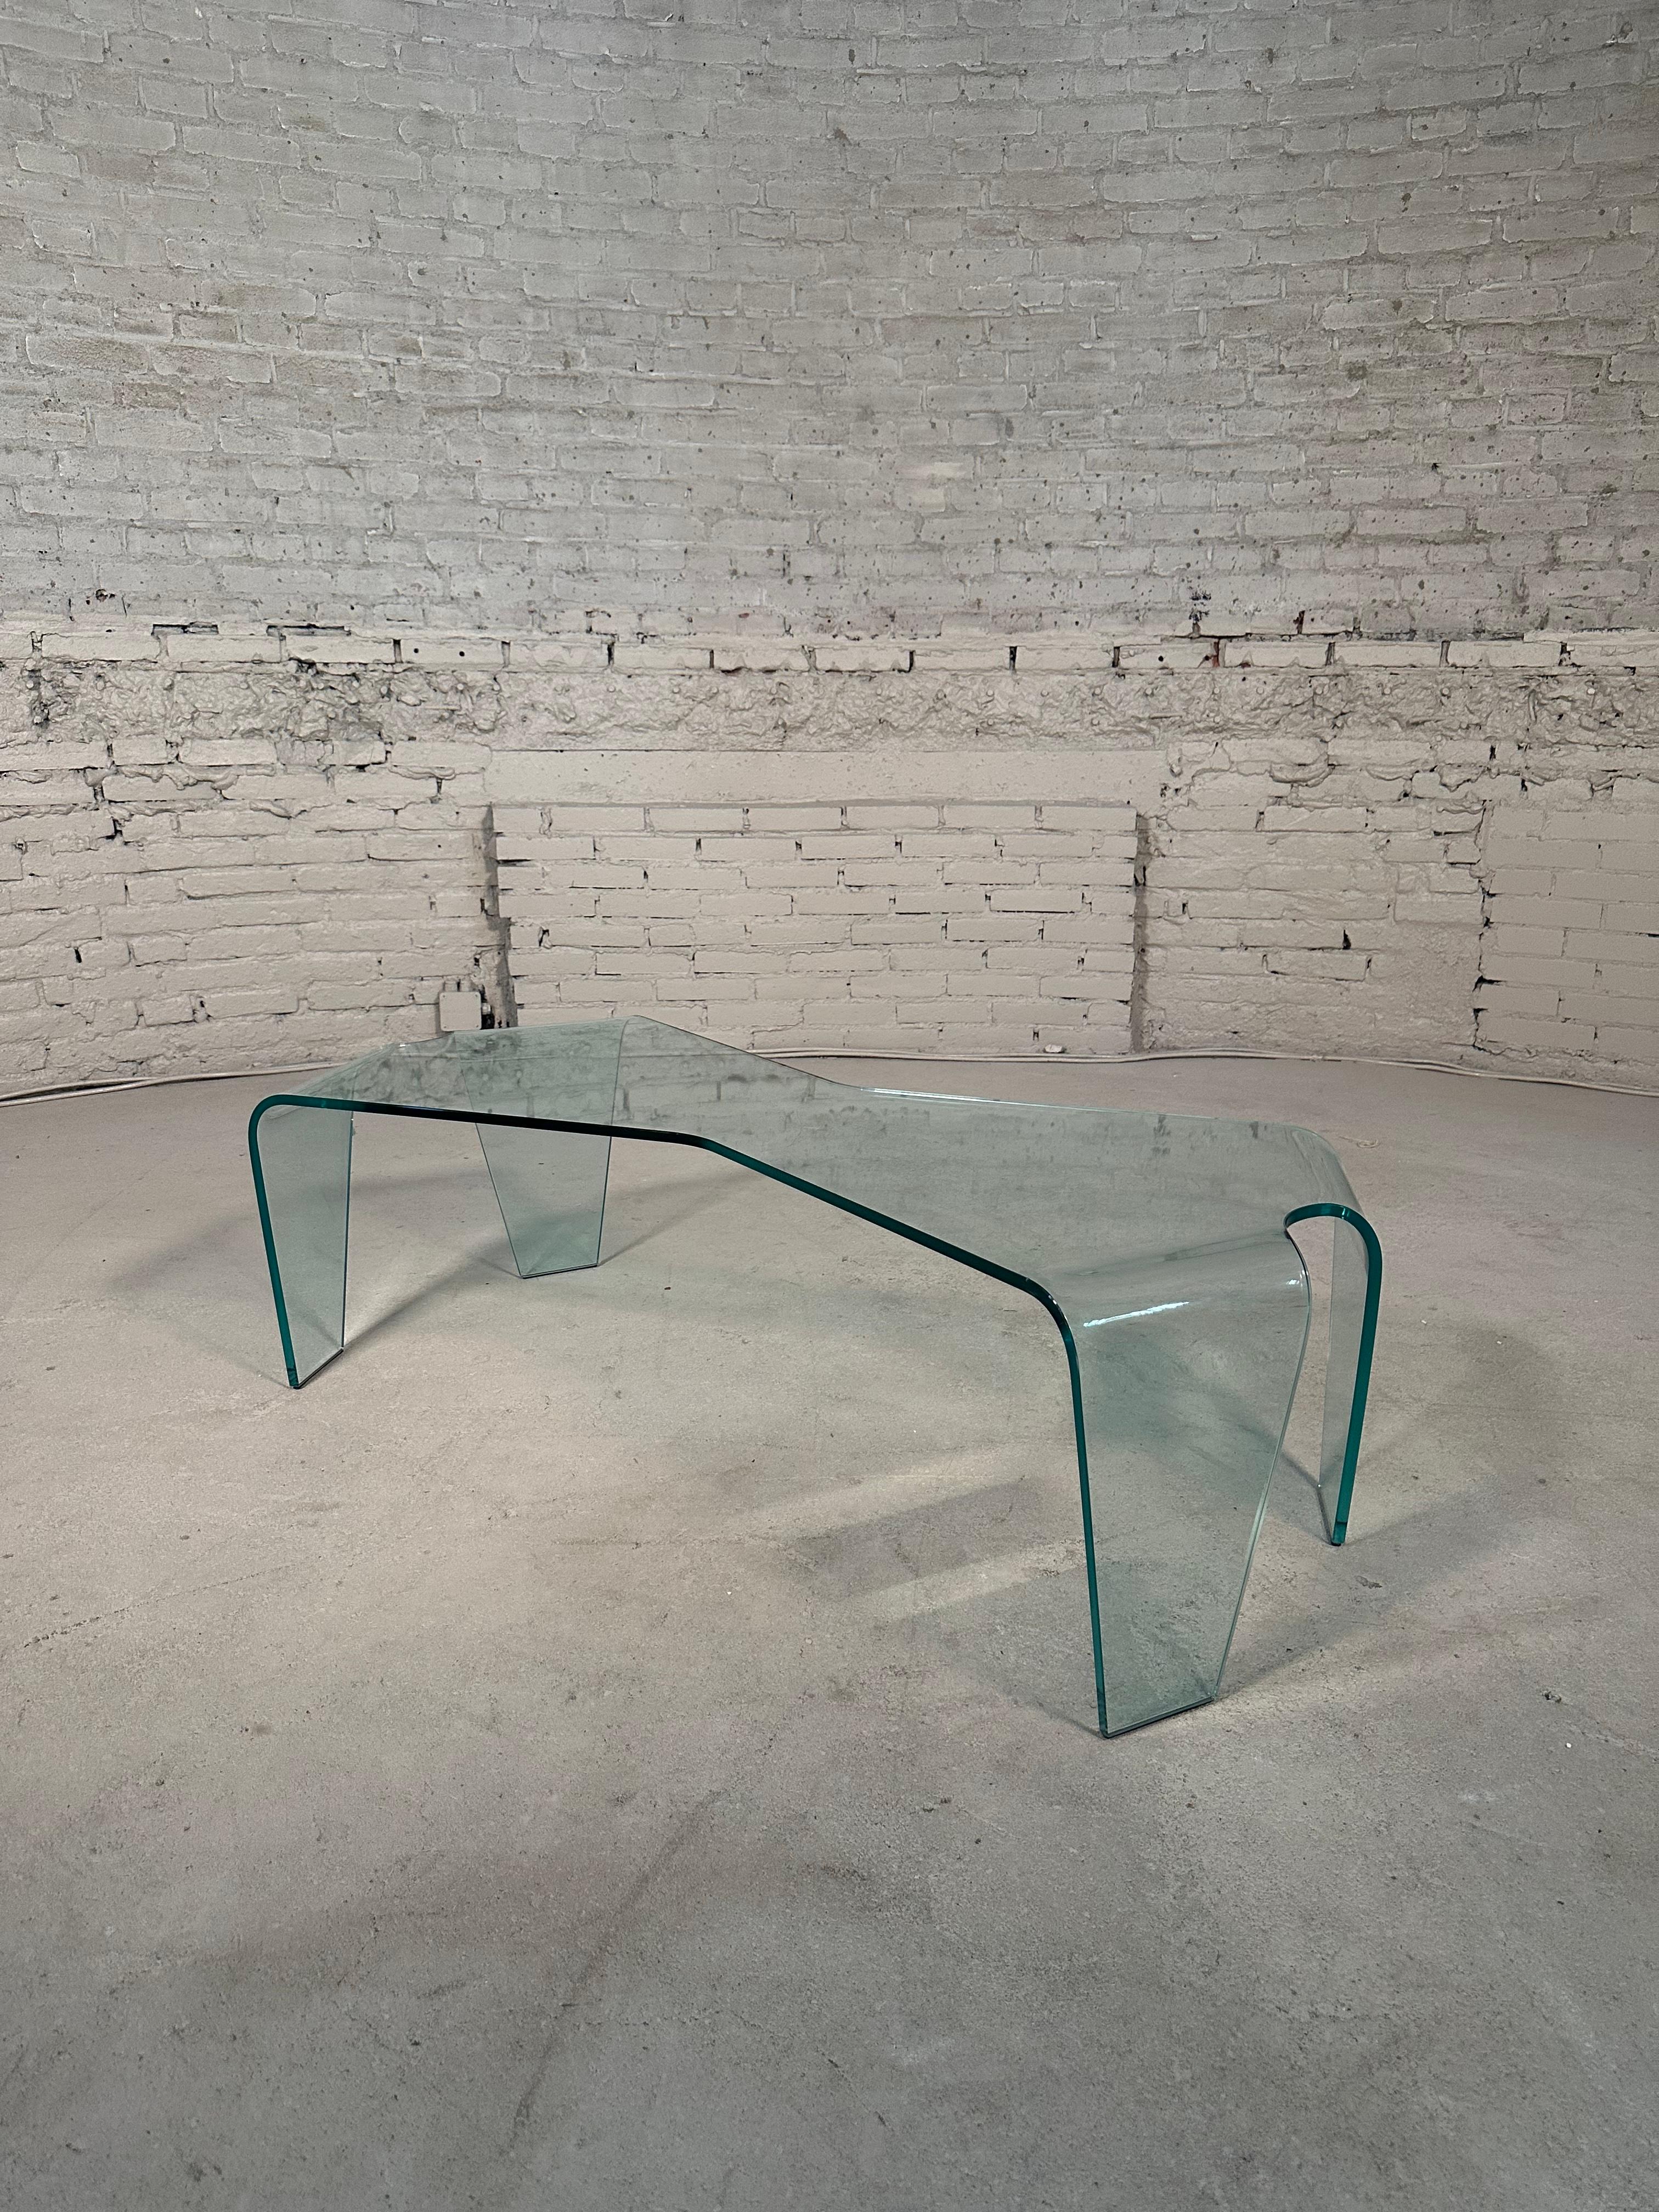 Elegant table made of curved glass. A timeless table that fits into all styles and rooms, providing space and visual light to the entire environment.